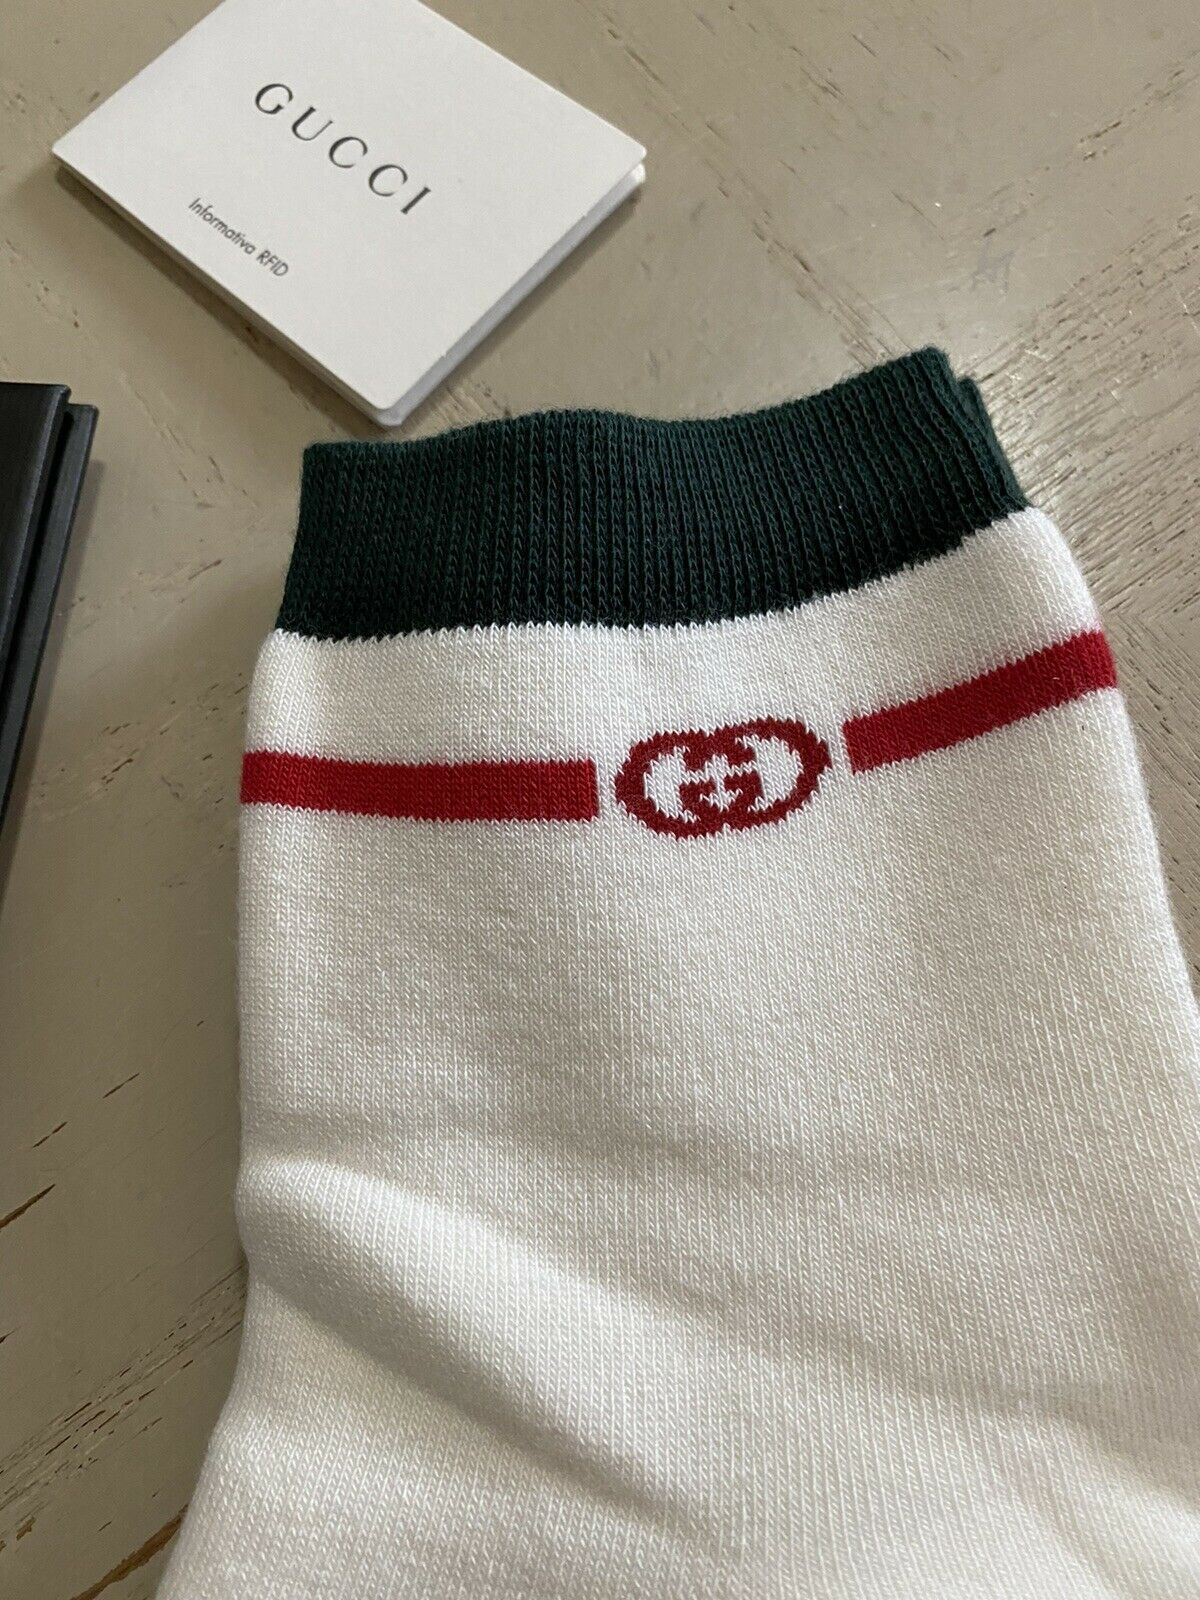 NWT Gucci Men’s Cotton Socks With GG Monogram White Size L Italy